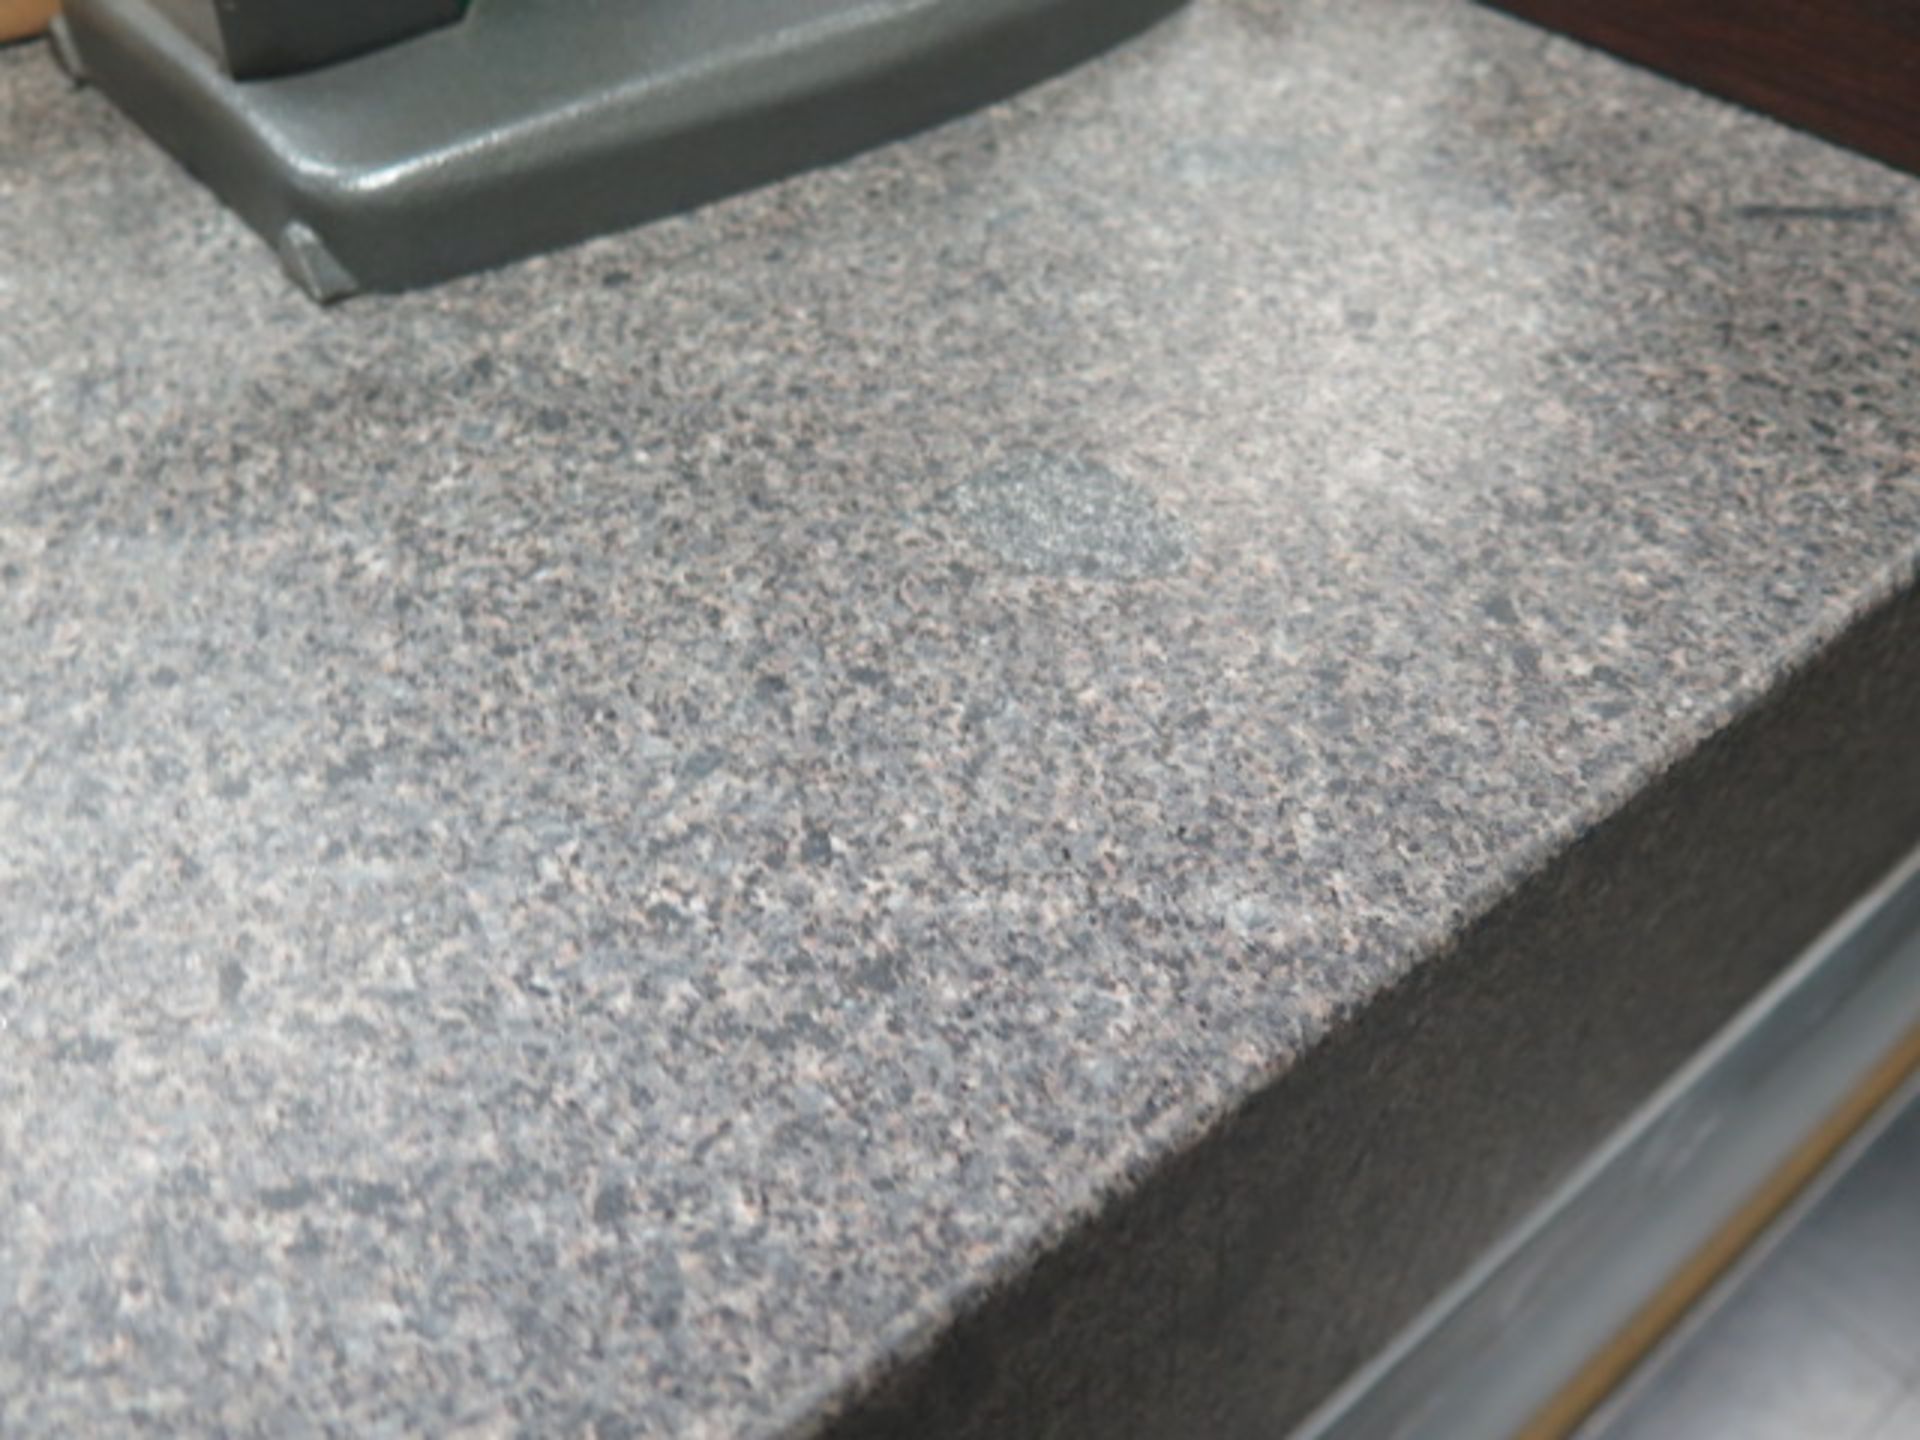 Standridge 36" x 60" x 6" 2-Ledge Granit Surface Plate w/ Roll Stand (SOLD AS-IS - NO WARRANTY) - Image 4 of 5